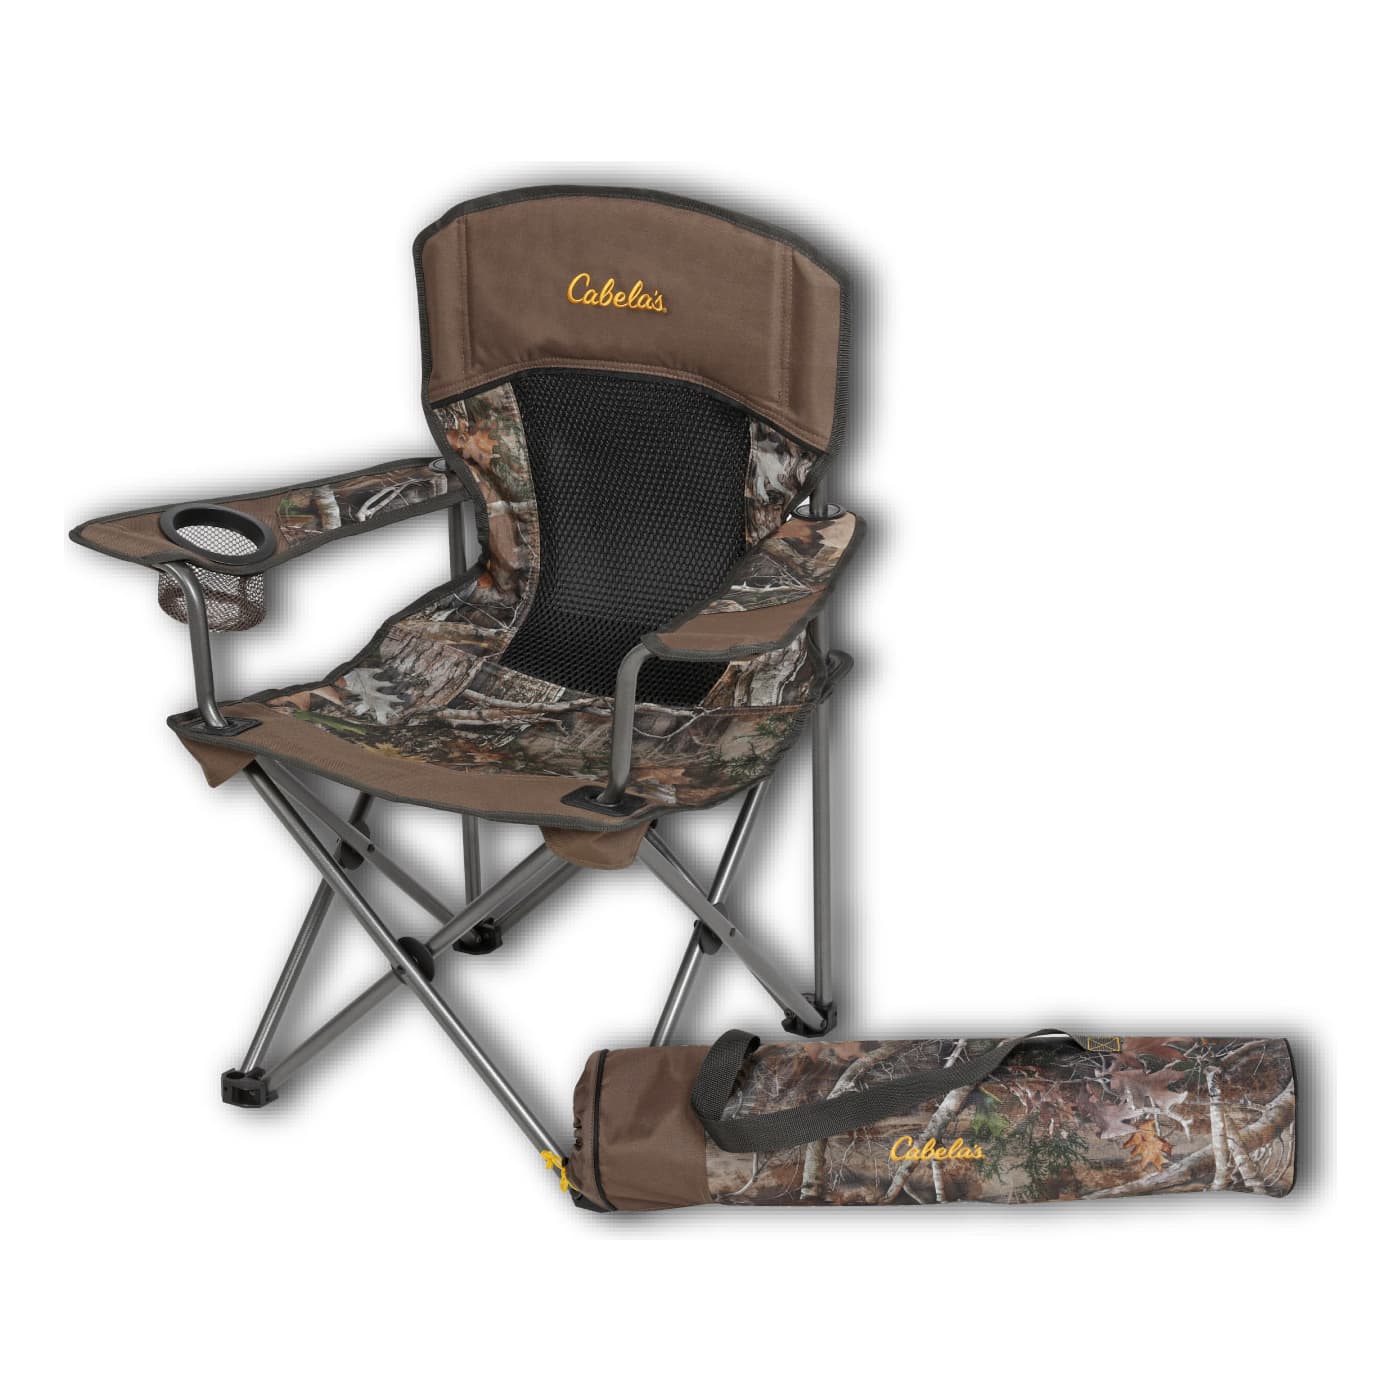 Cabela's Youth Chair